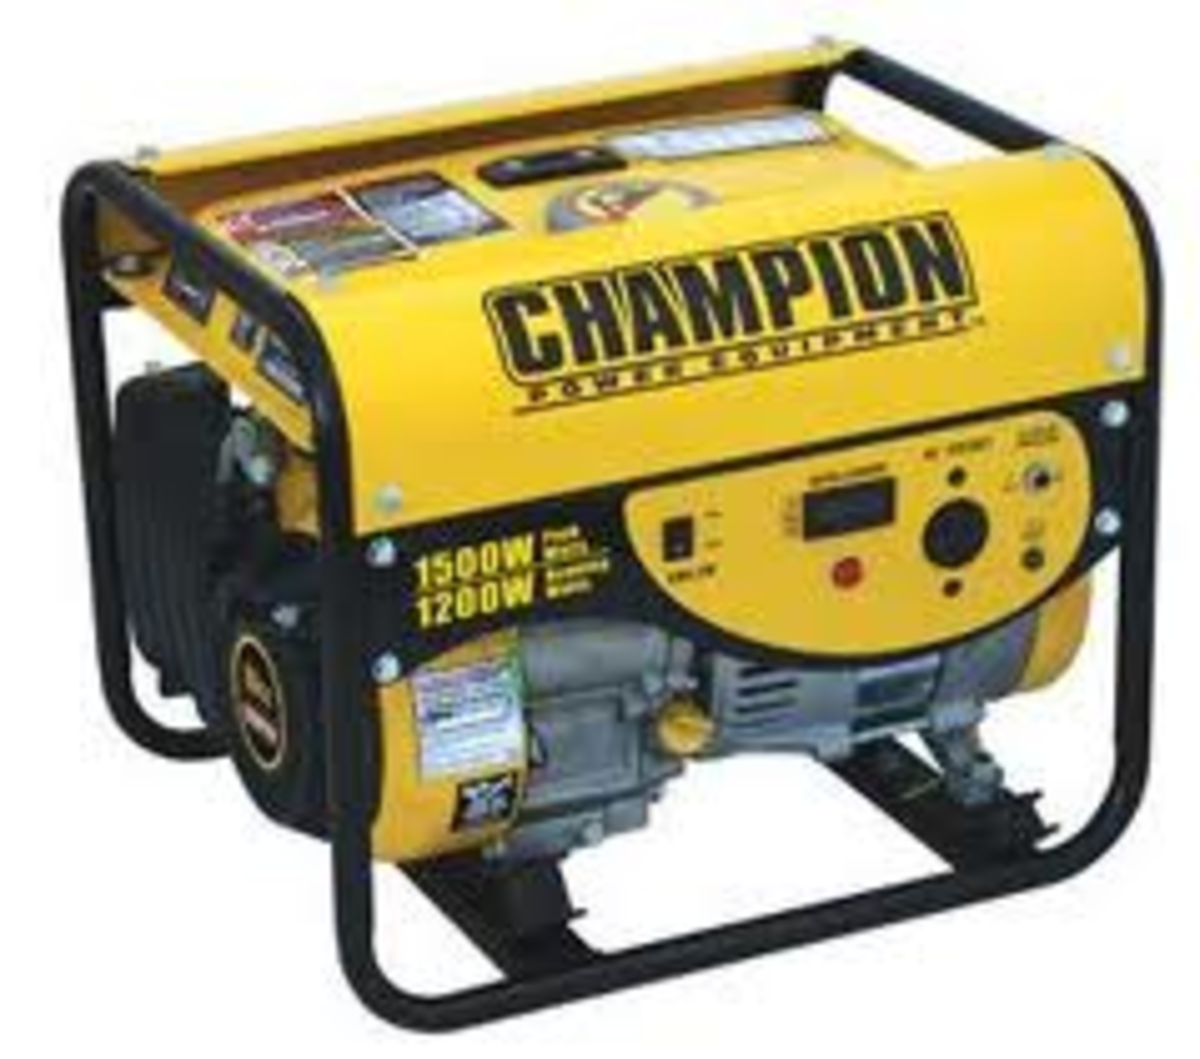 A Typical Portable Generator